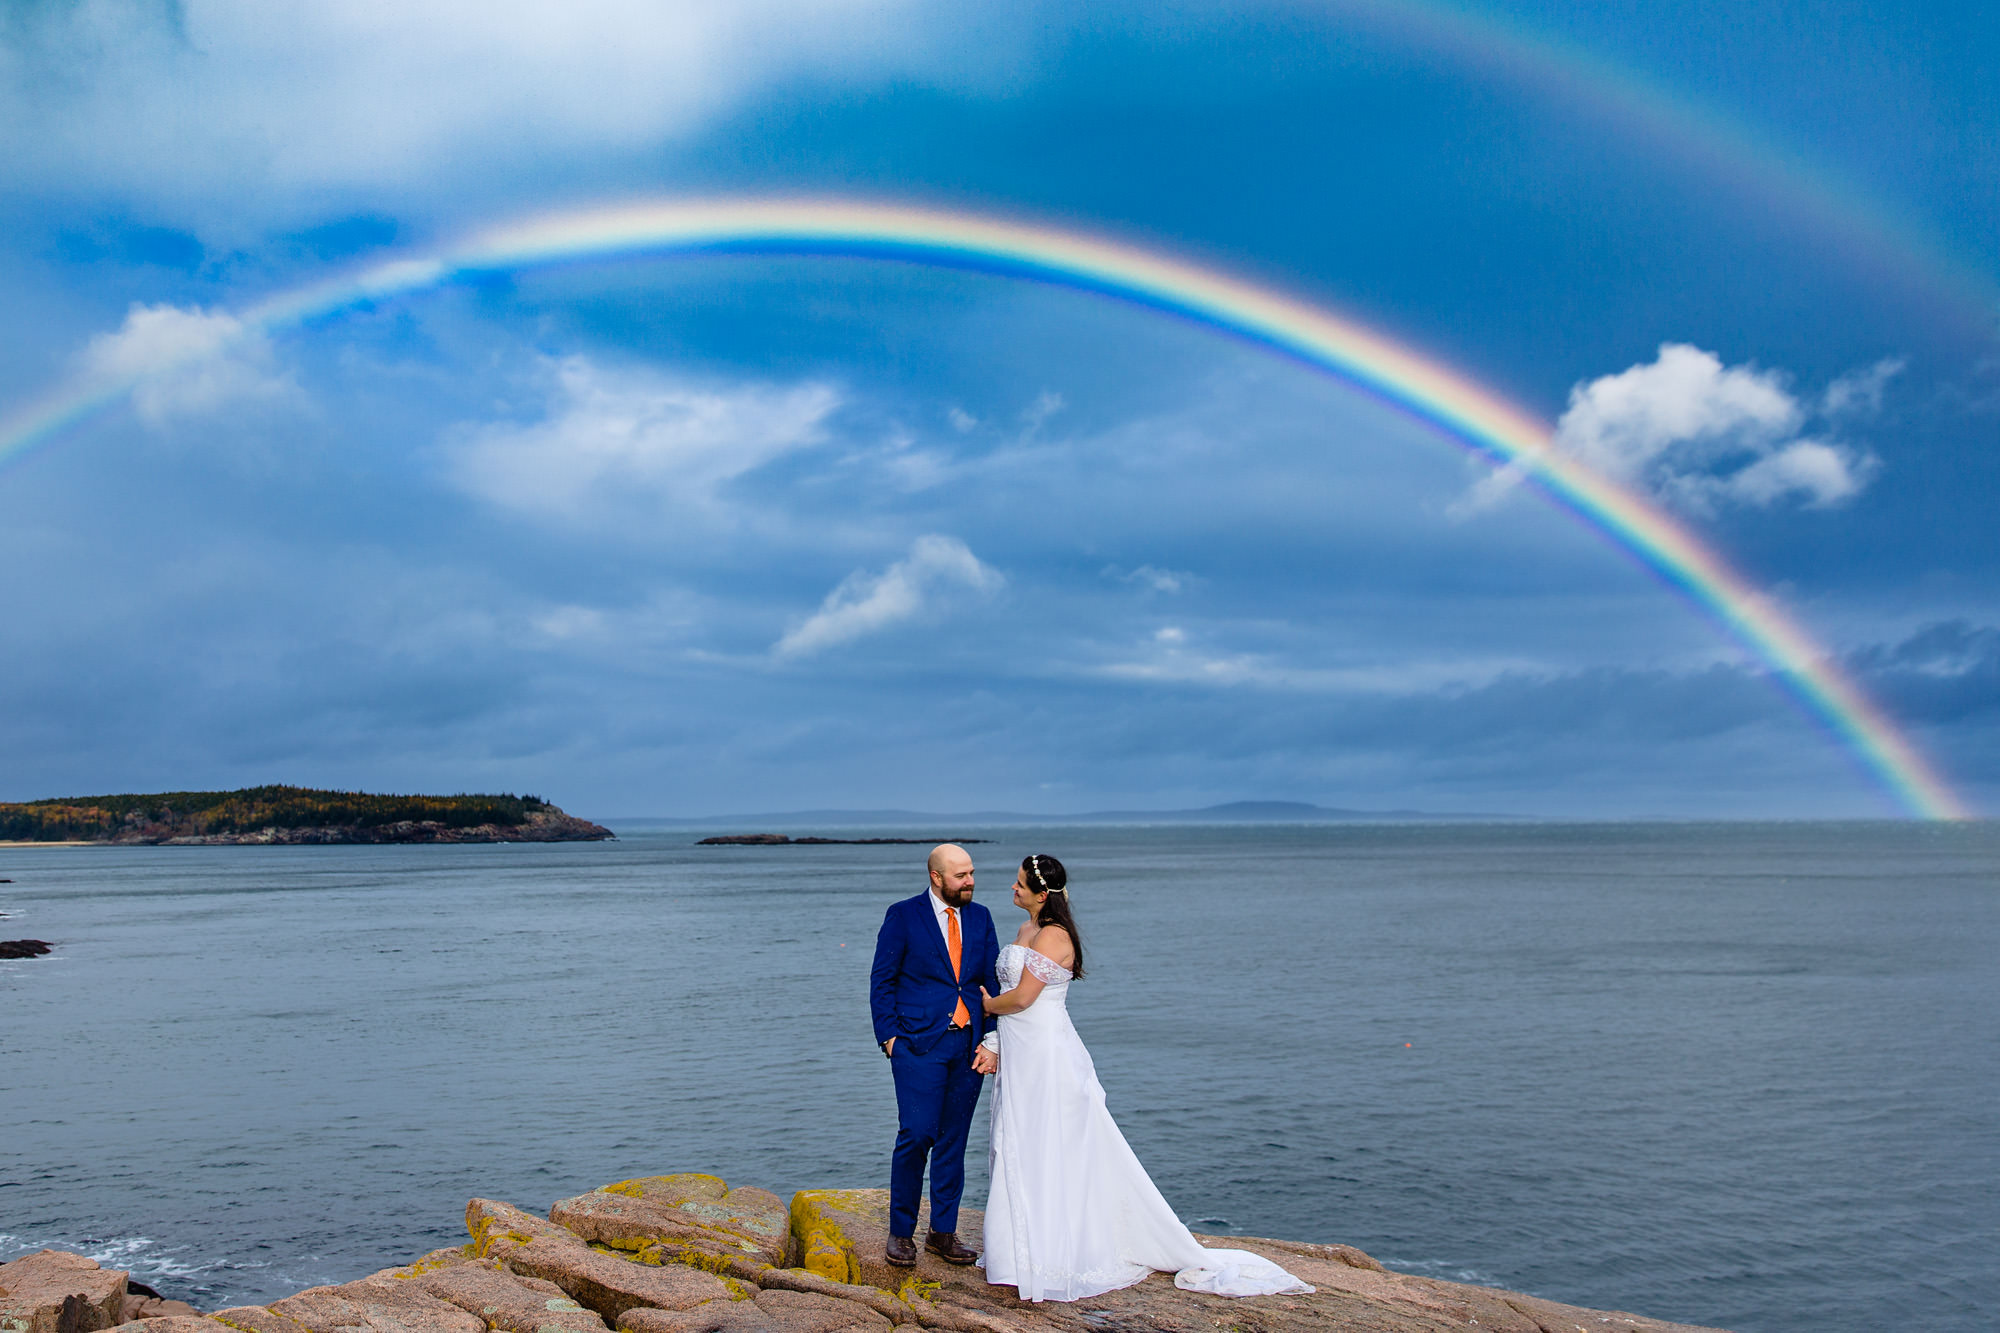 An Acadia Adventure Elopement that featured a rainbow